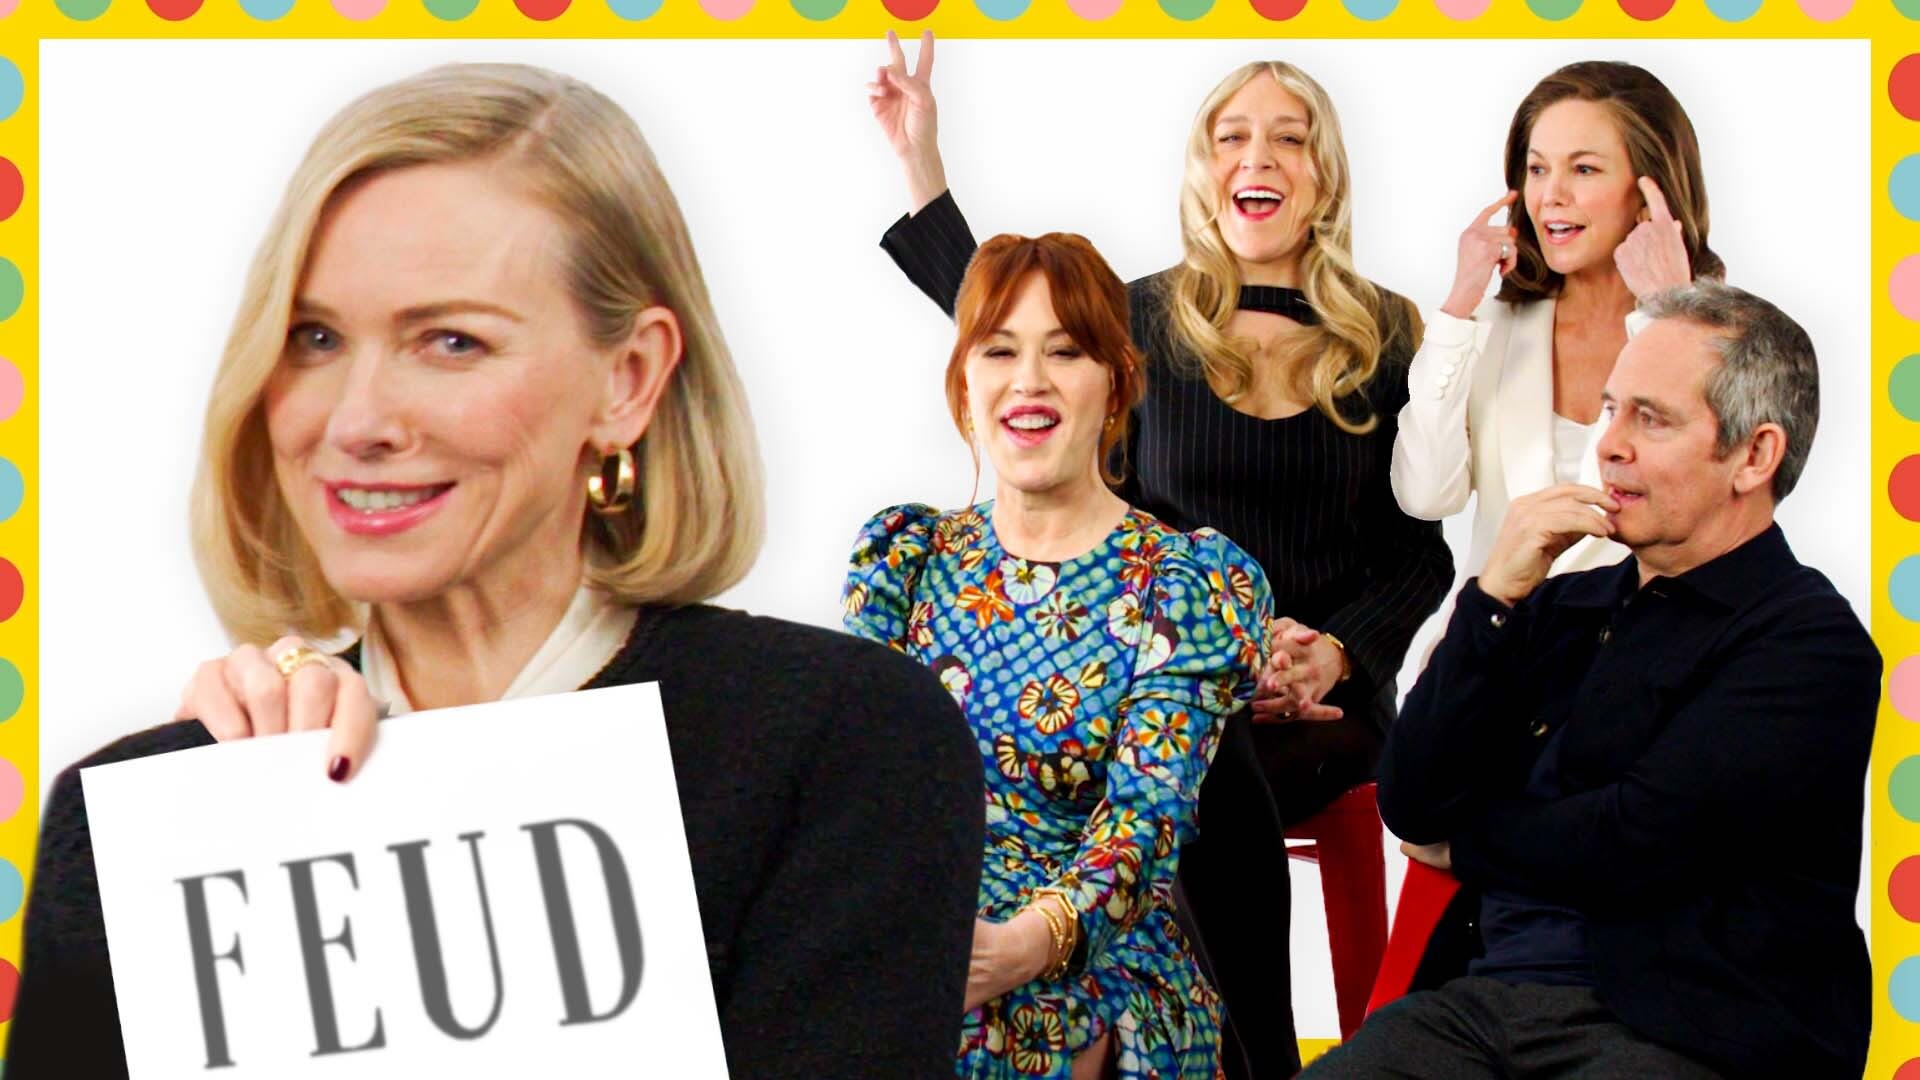 Watch Feud Cast Test How Well They Know Each Other Quizzing Each